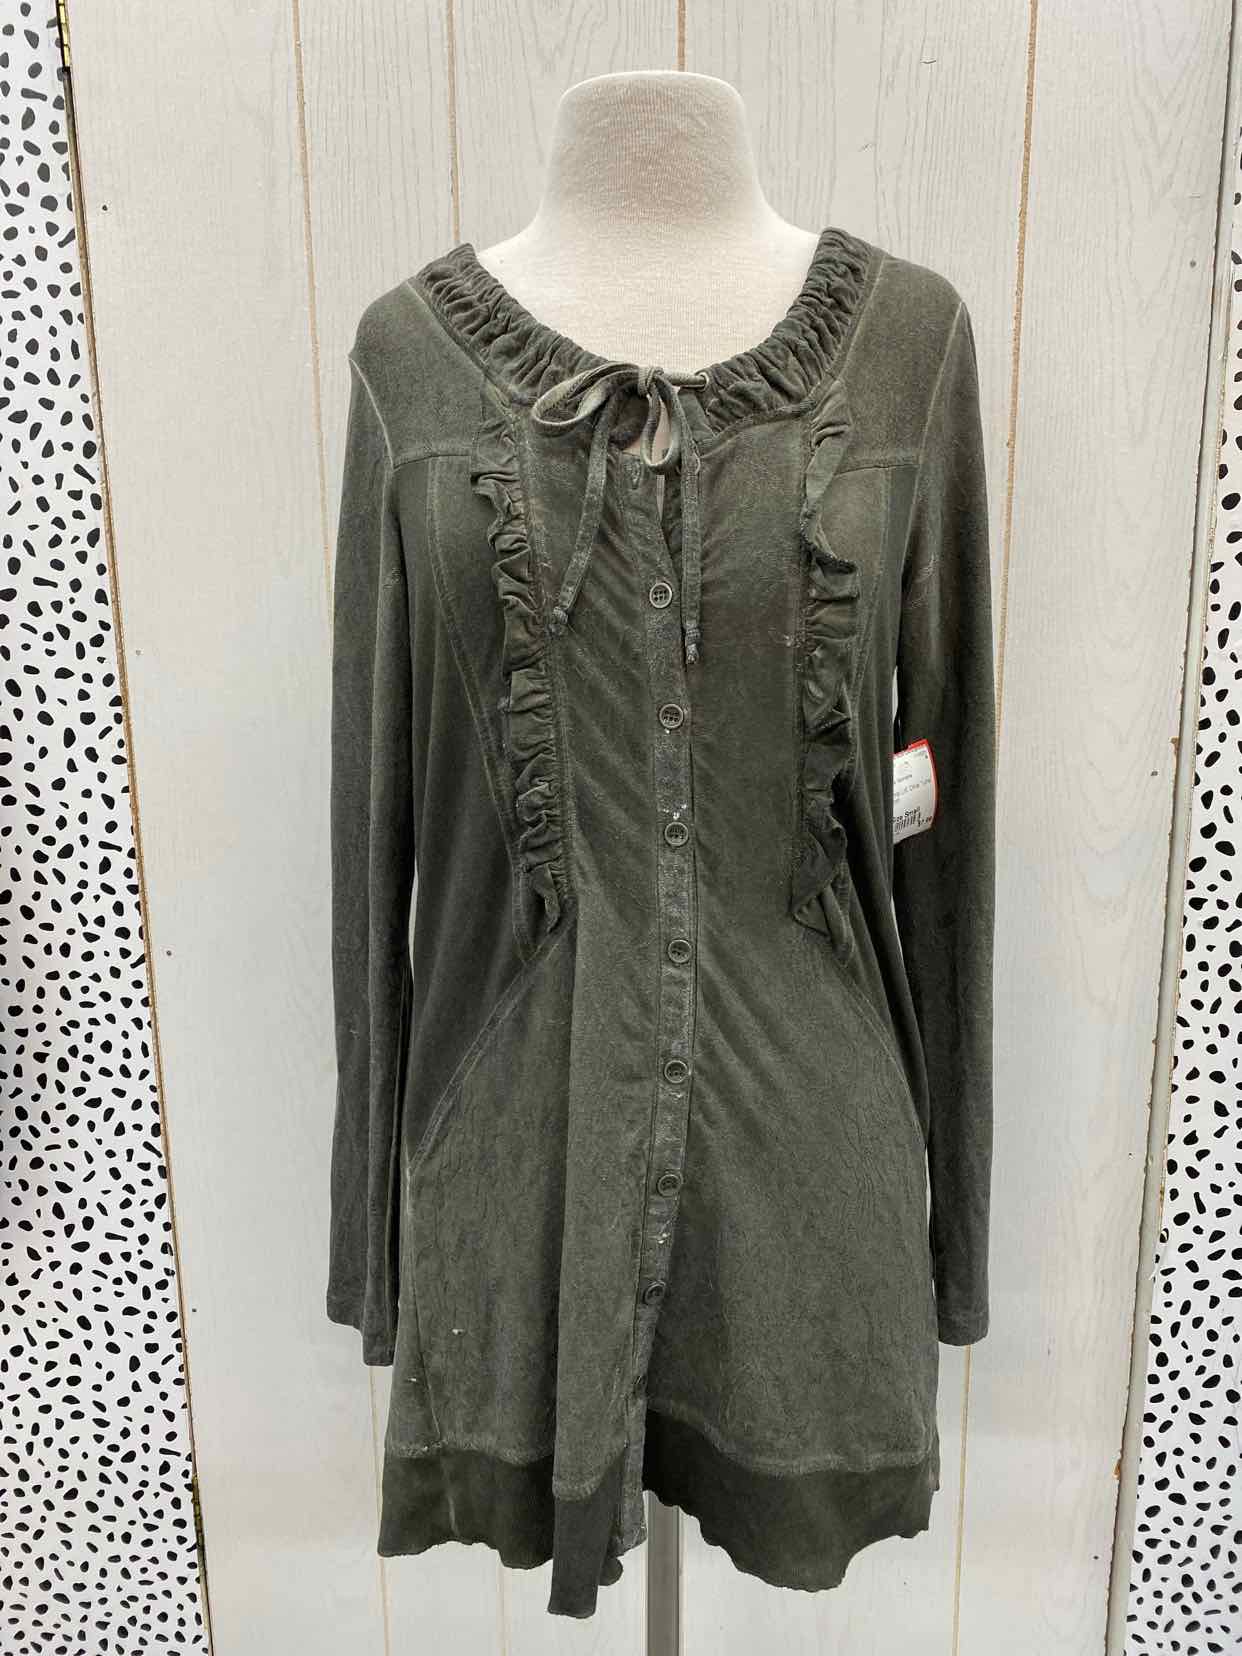 Olive Womens Size Small Shirt